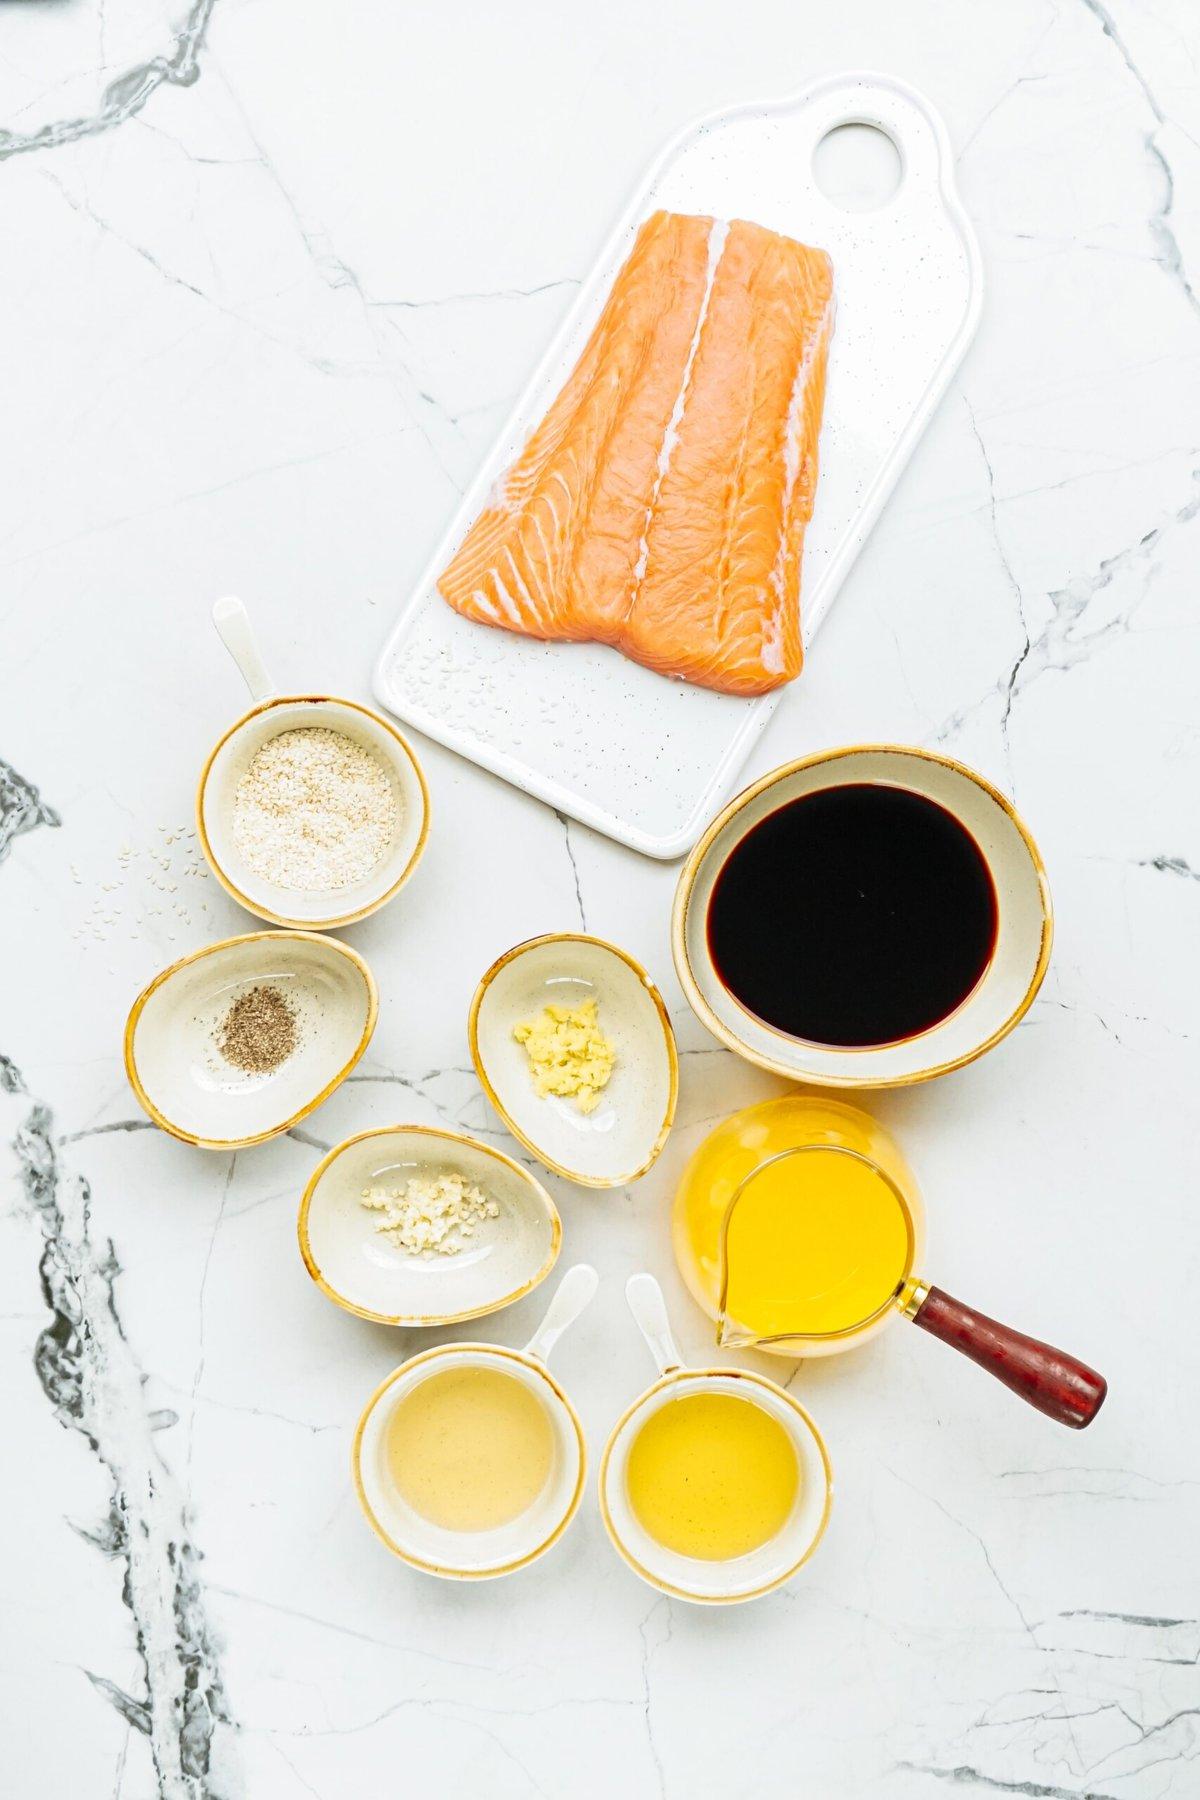 Ingredients for a salmon dish on a elegant marble countertop.